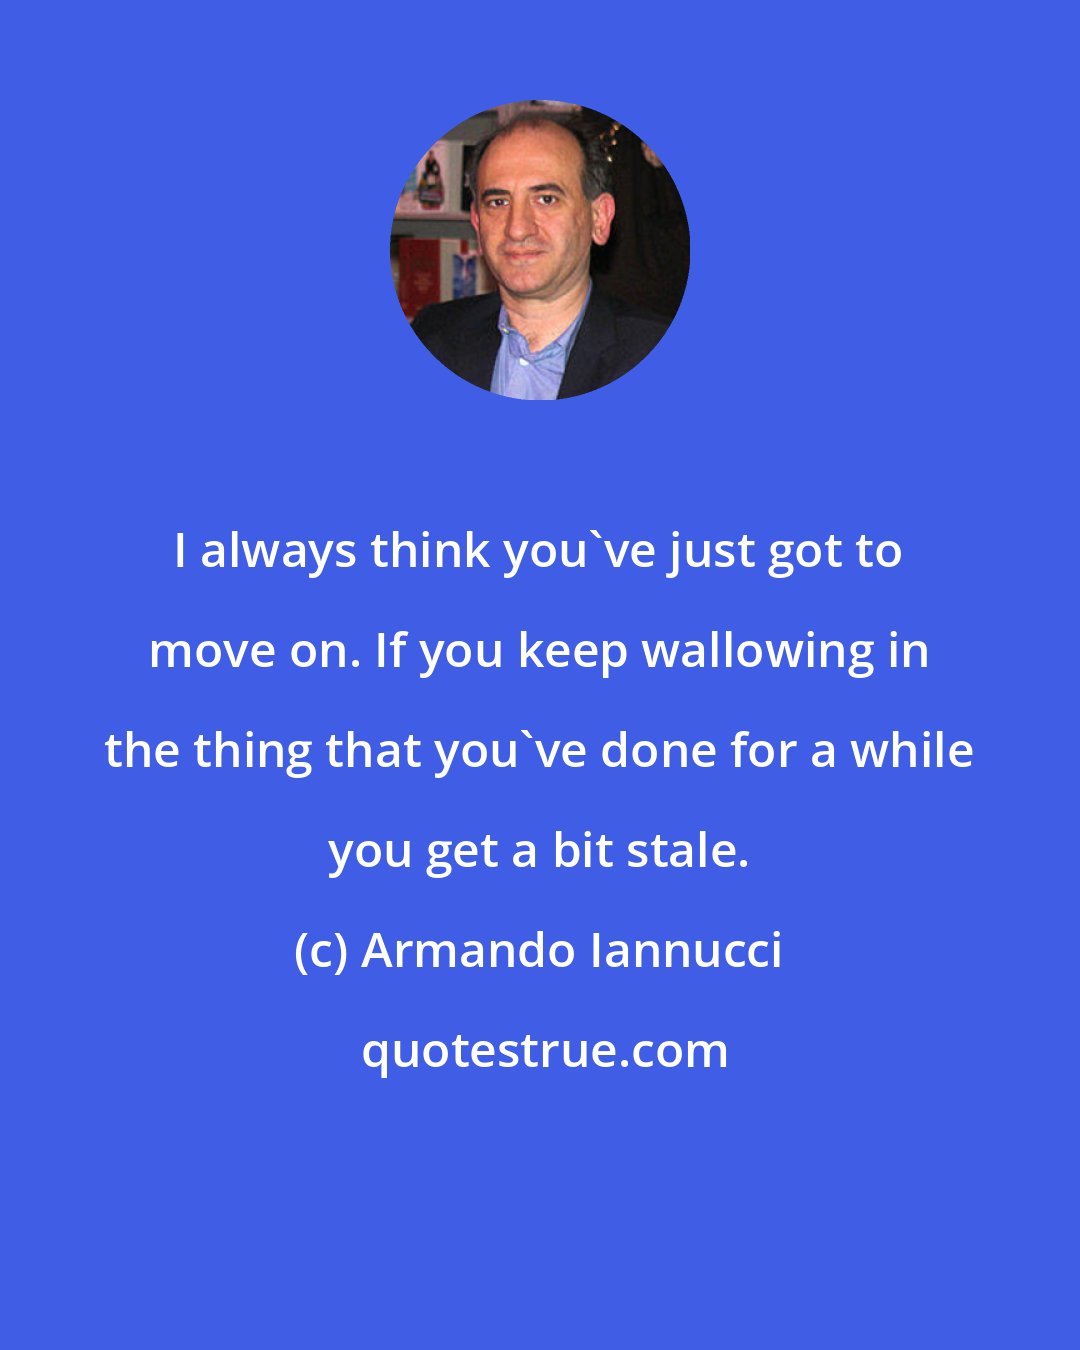 Armando Iannucci: I always think you've just got to move on. If you keep wallowing in the thing that you've done for a while you get a bit stale.